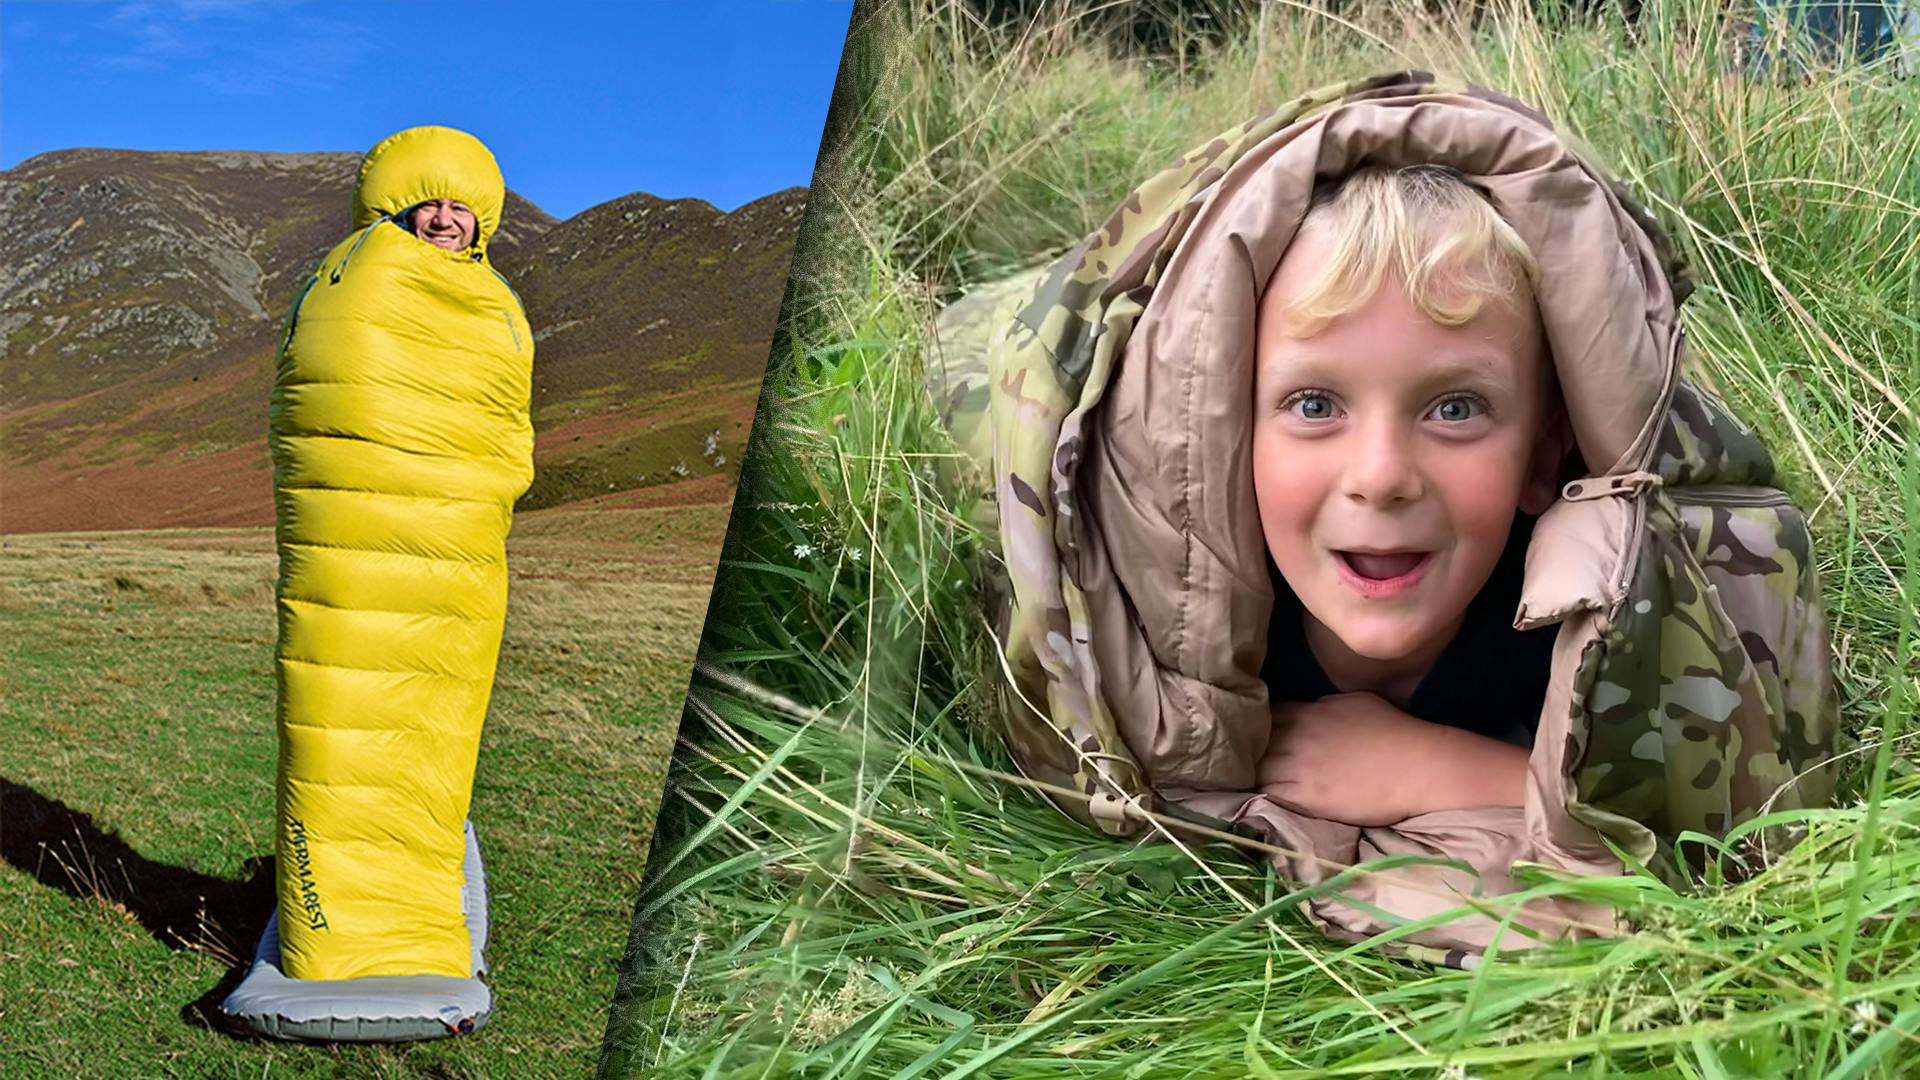 The 8 Smallest Sleeping Bags When Packed | Untamed Space